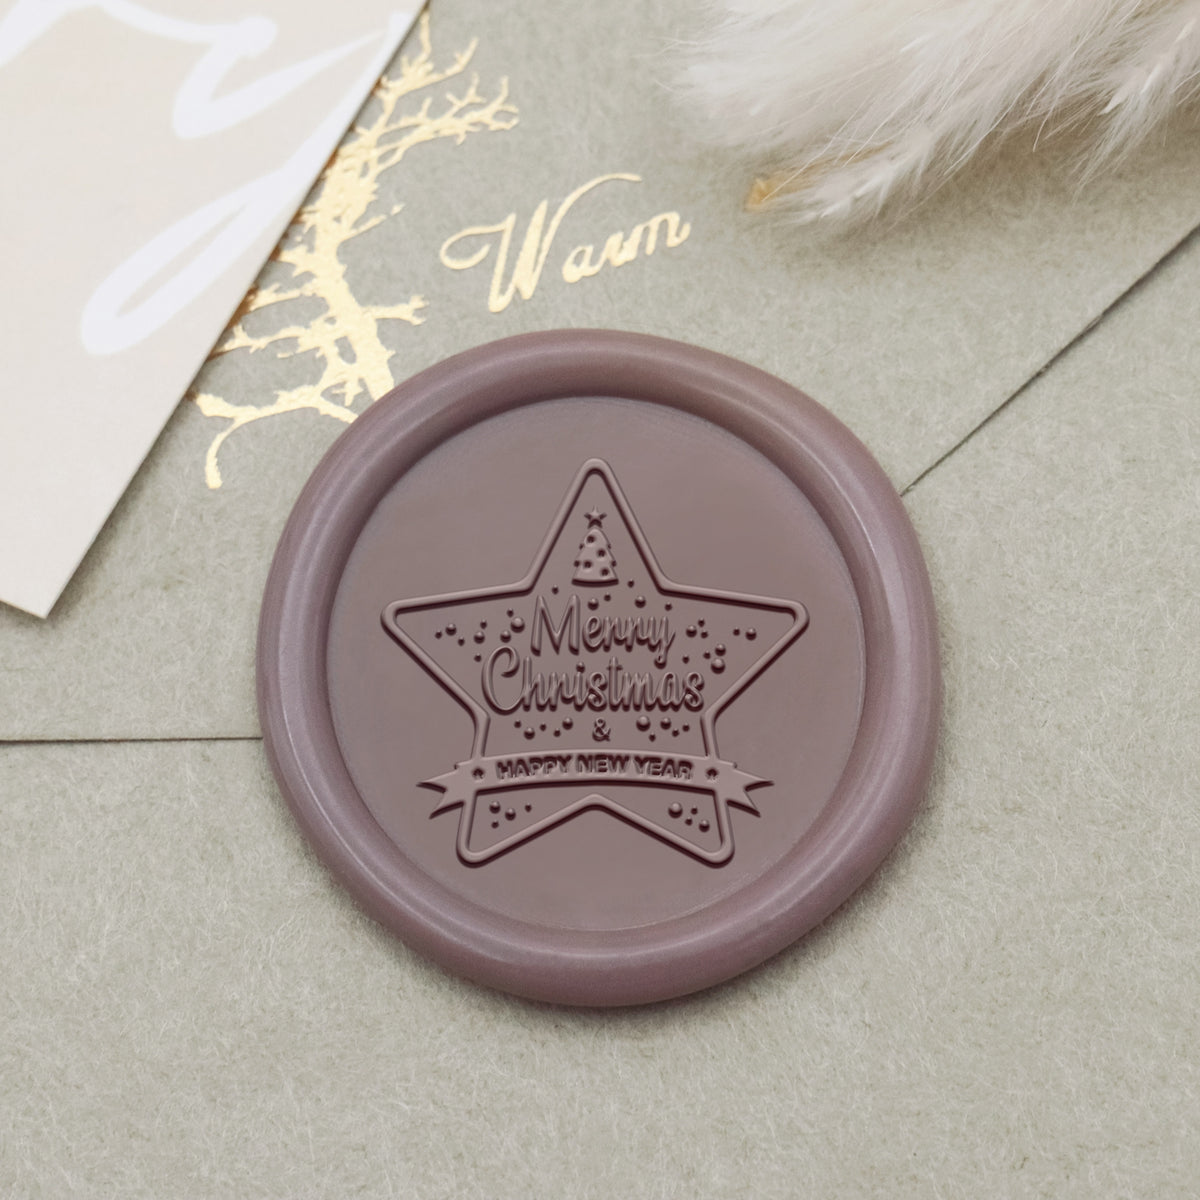 Happy New Year Wax Seal Stamp - Style 12 1